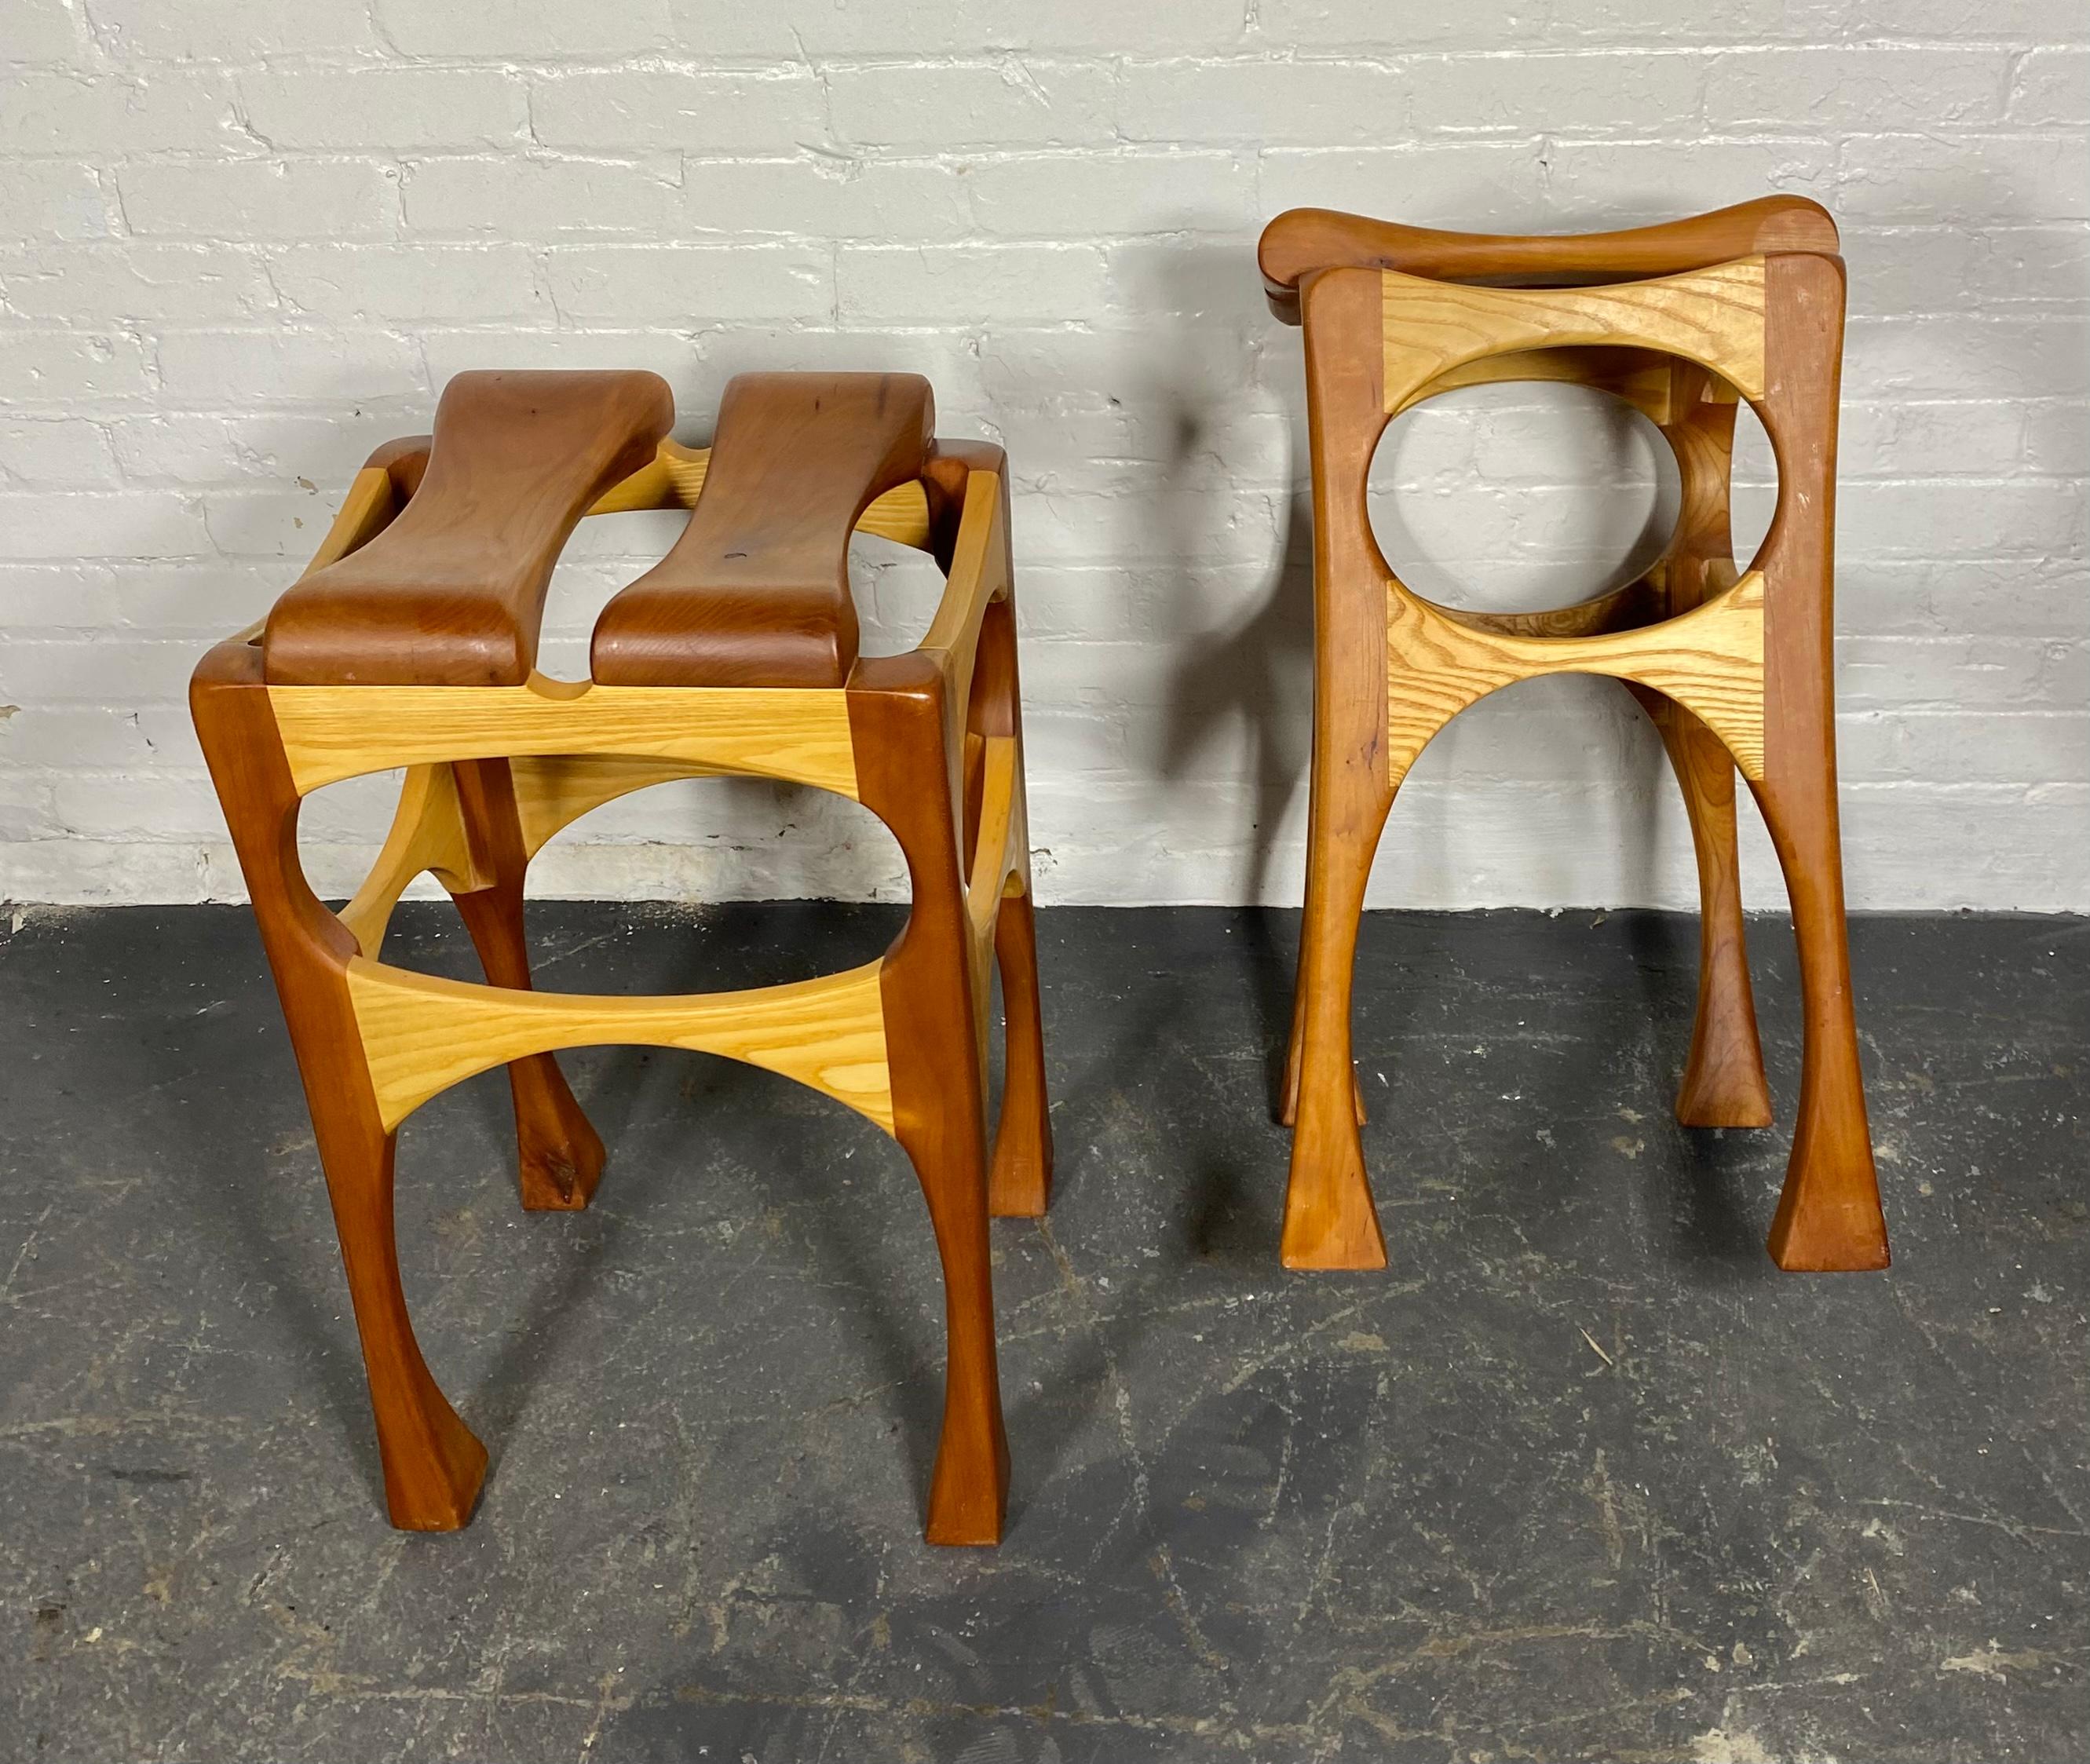 Hand Crafted Bespoke Workshop/Studio Stools.  2-tone birch and cherry .. Stunning design,, Super smooth carved cherry wood tops.. aRTIST SIGNED BUT unfortunately cant make out signature /? Dated 2001..